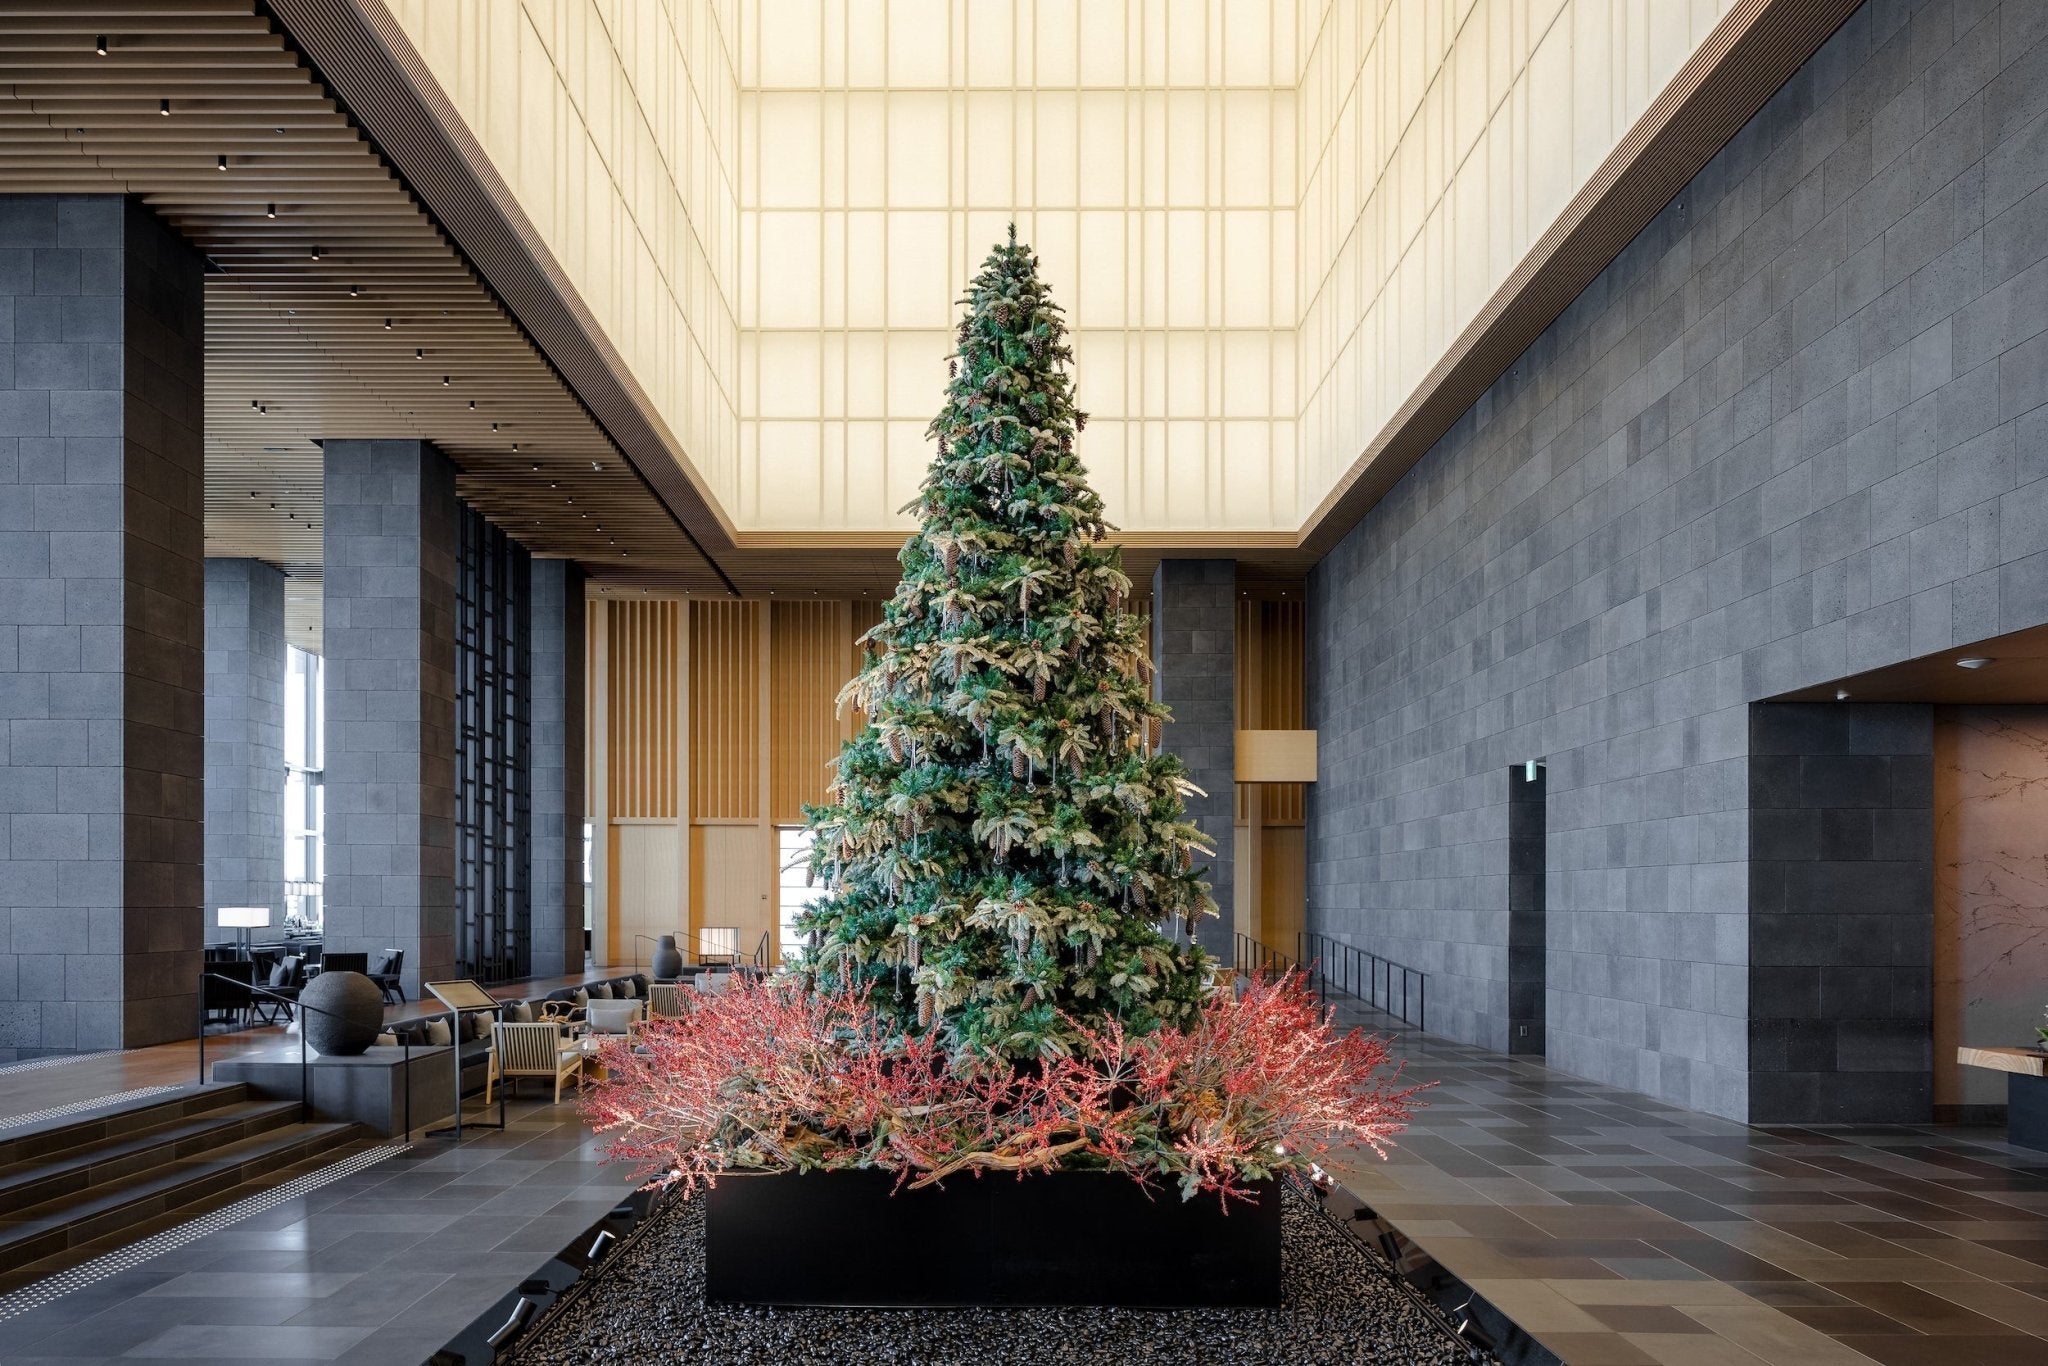 10 Great Hotels for Christmas - Globe-Trotter Staging